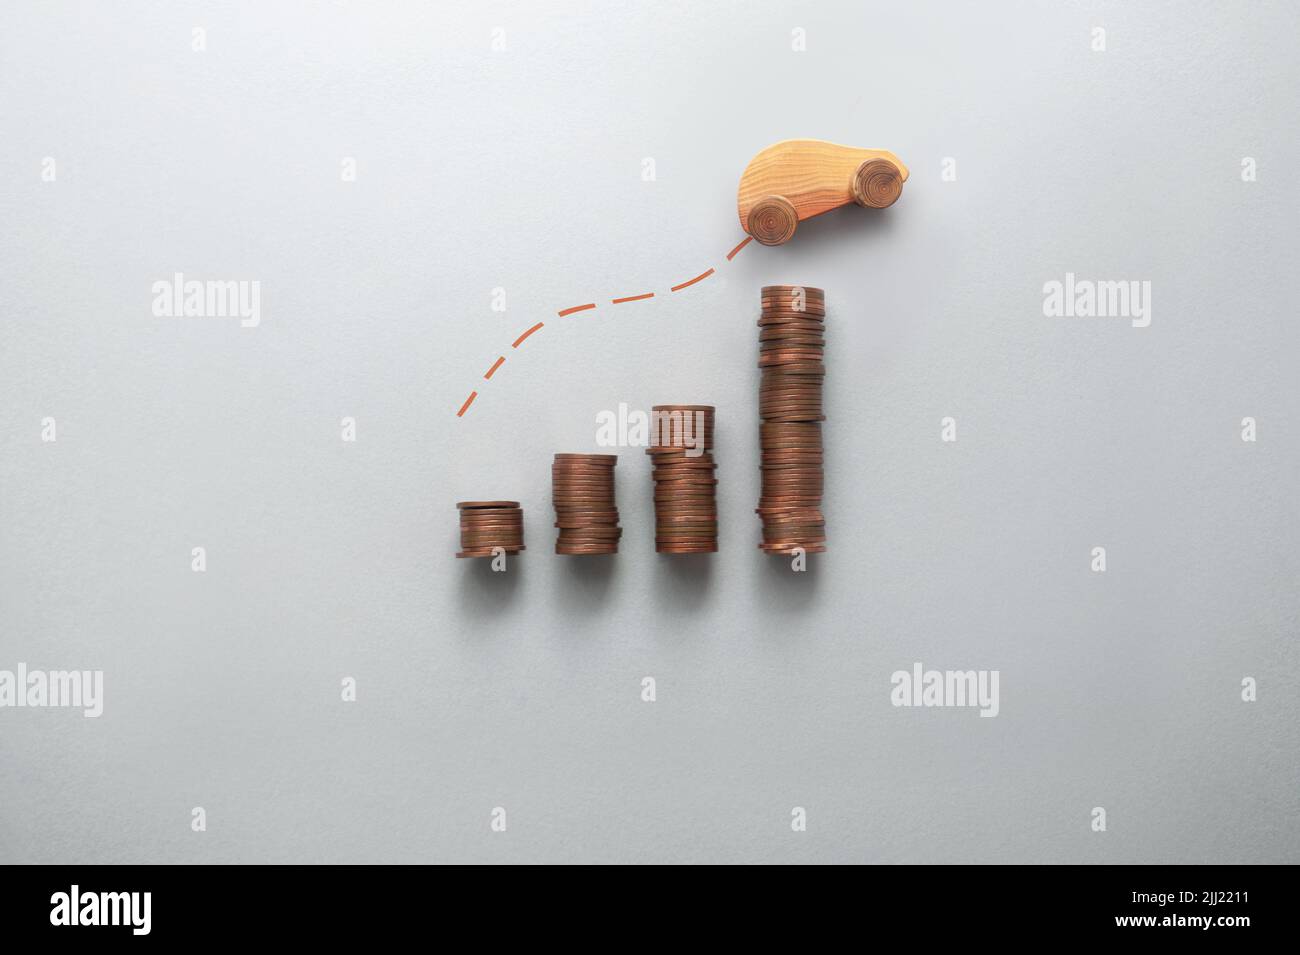 Increasing fuel, petrol, price concept, business chart stacks of coins with toy wooden car moving upwards Stock Photo